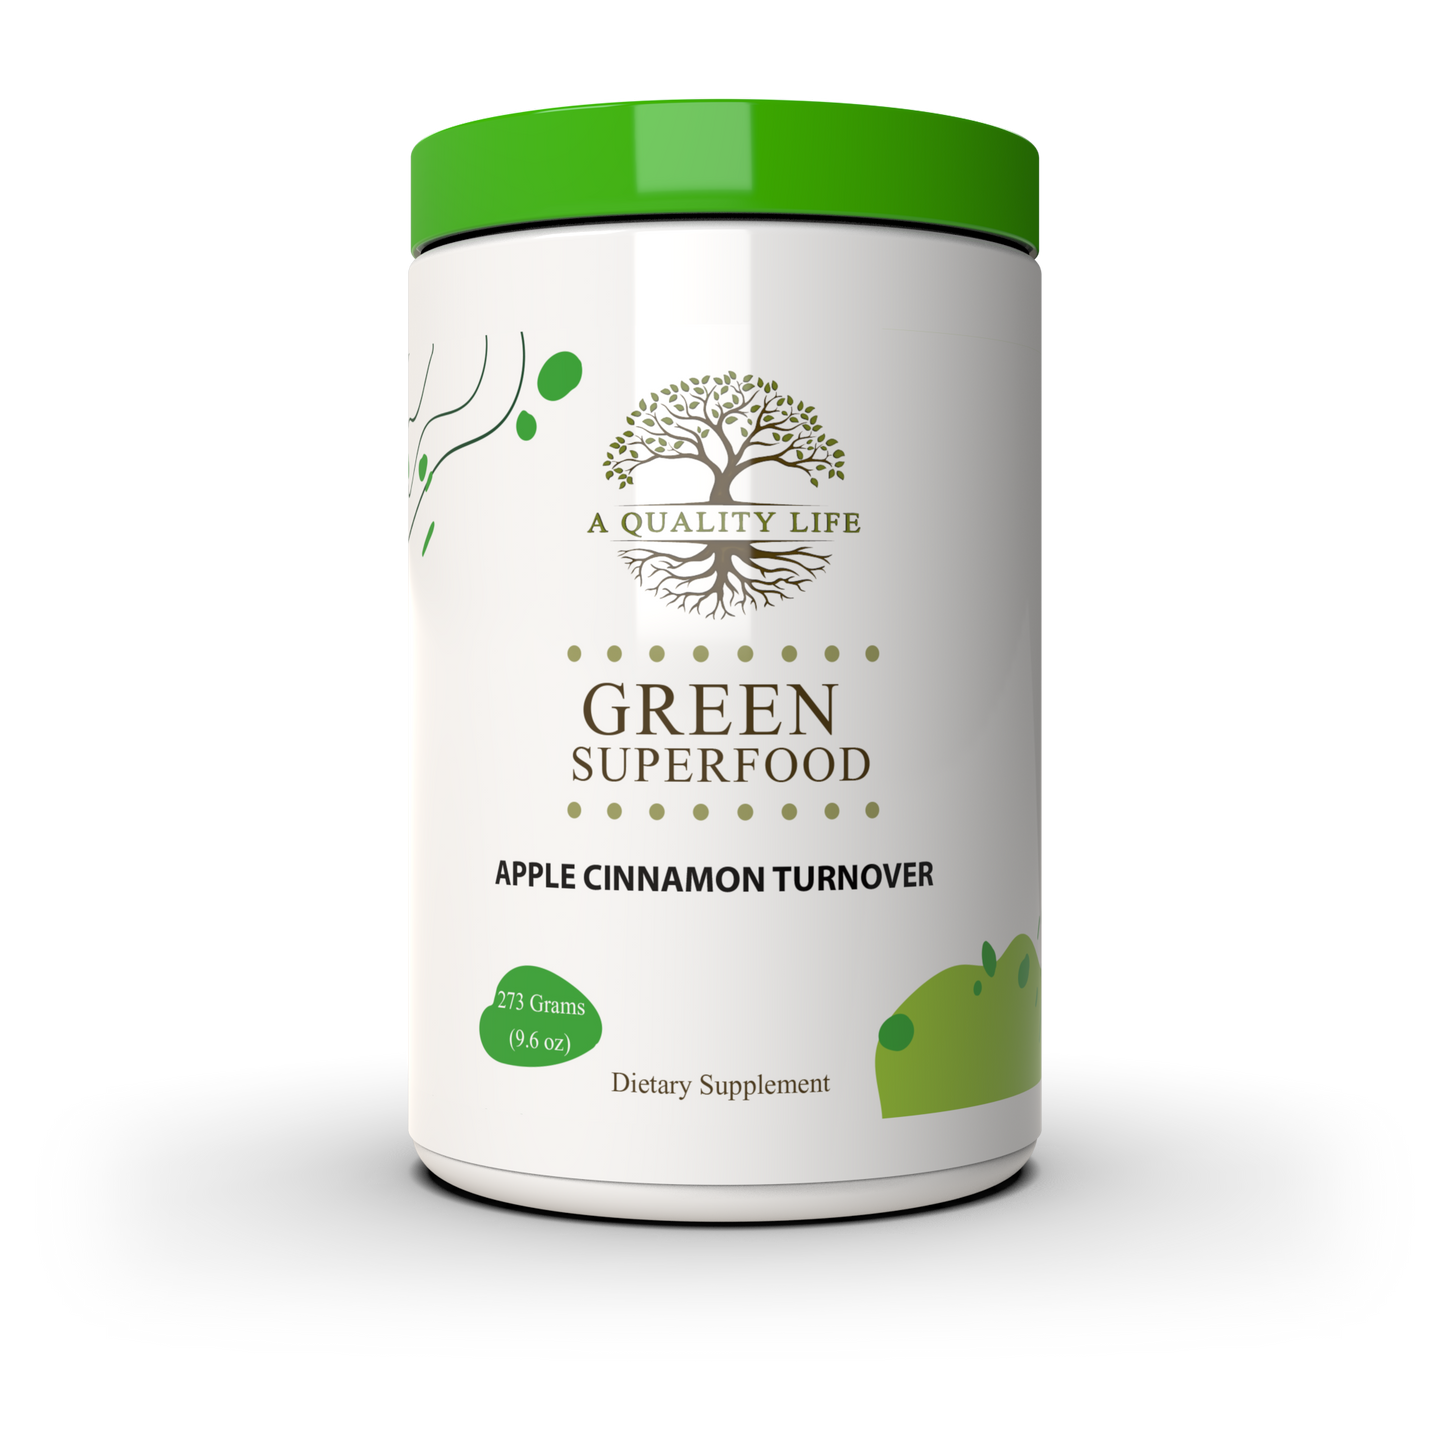 Green Superfood - Apple Cinnamon Turnover by A Quality Life Nutrition